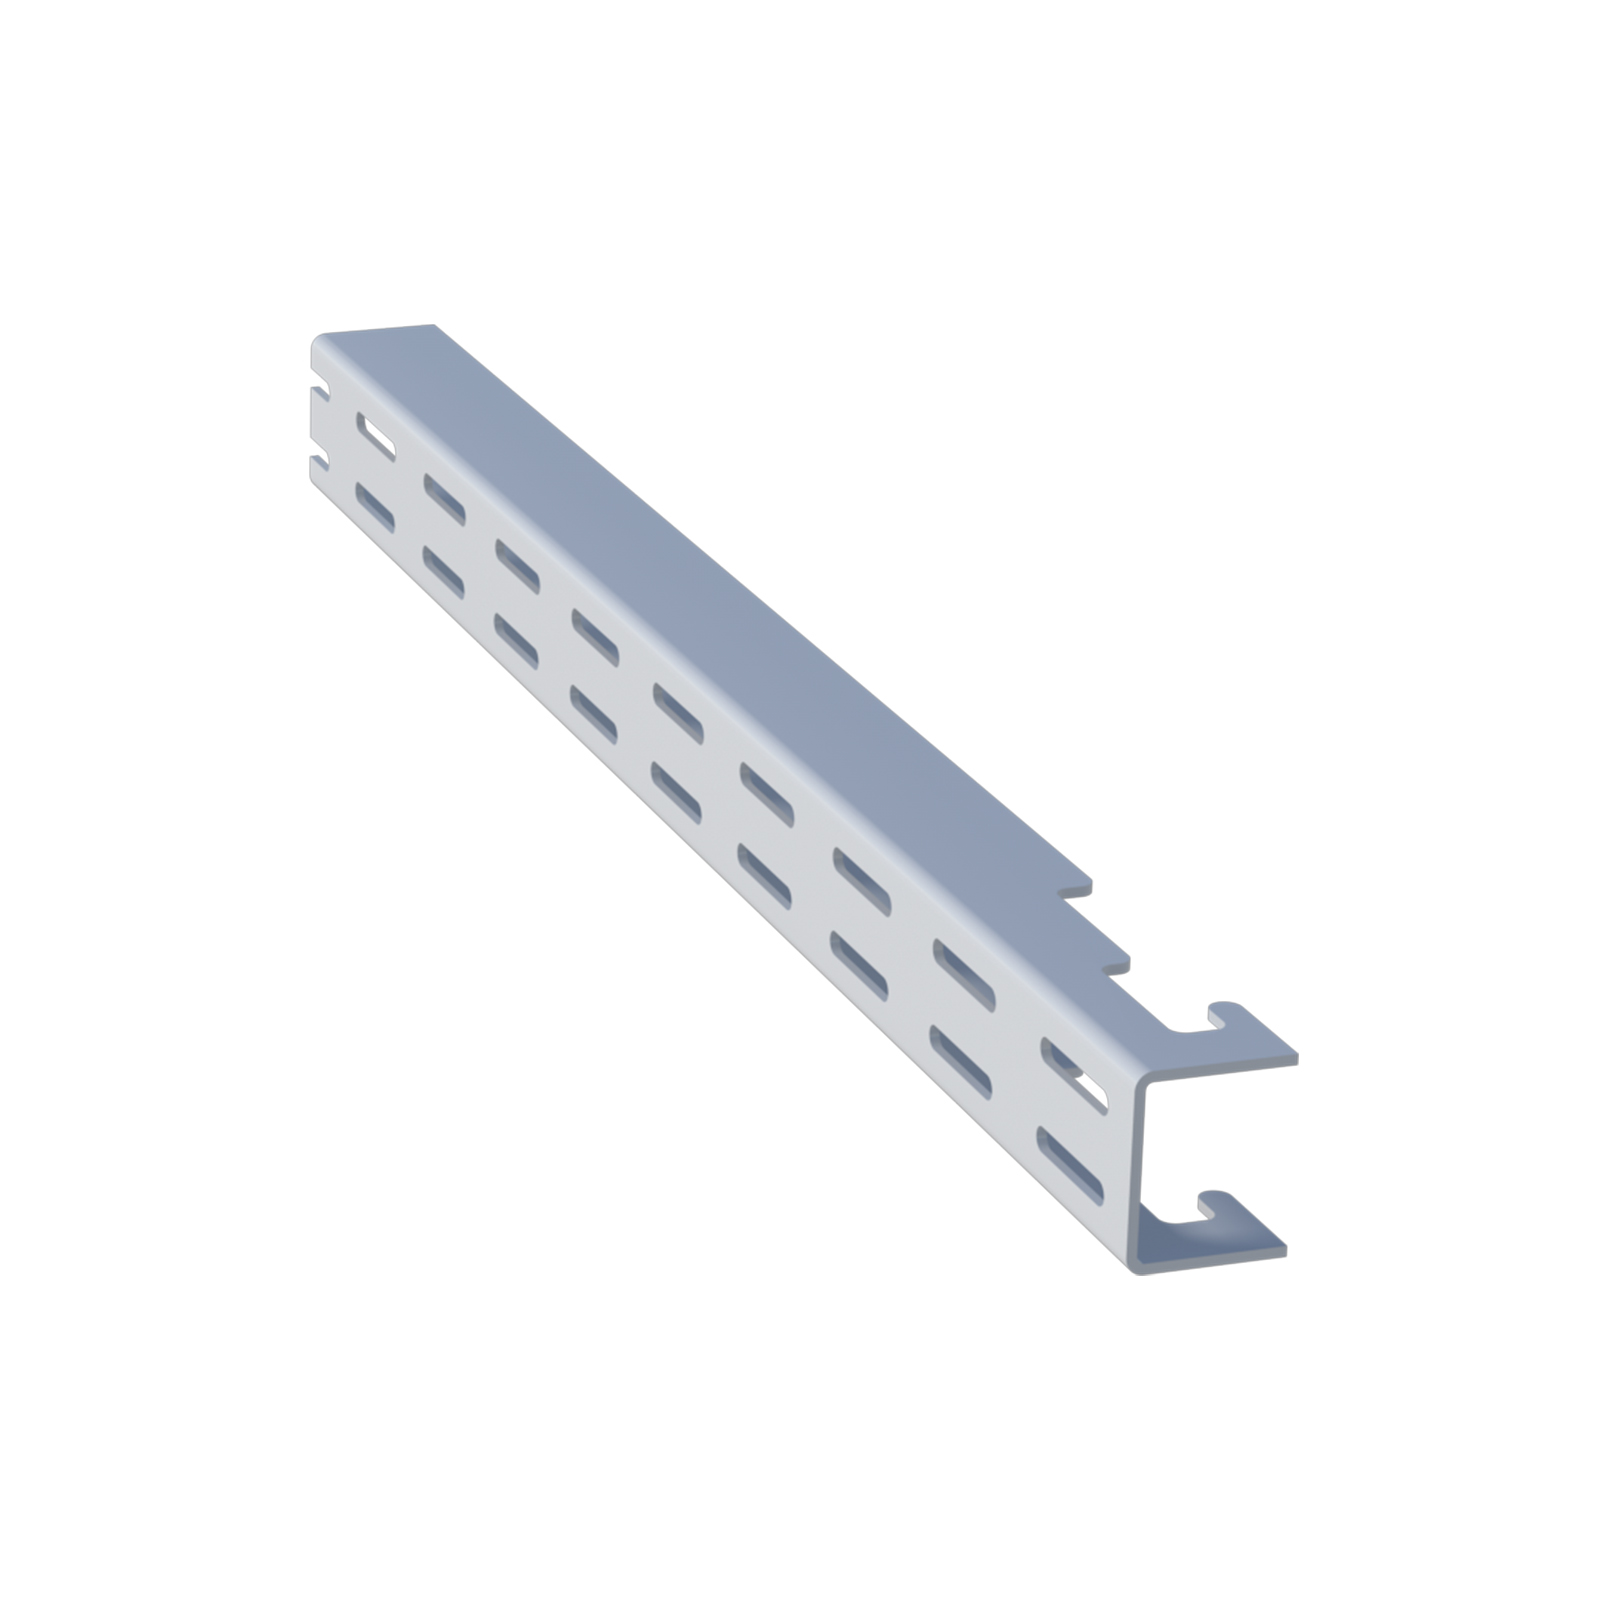 Home Solutions Double Slot Wall Strip White 300mm